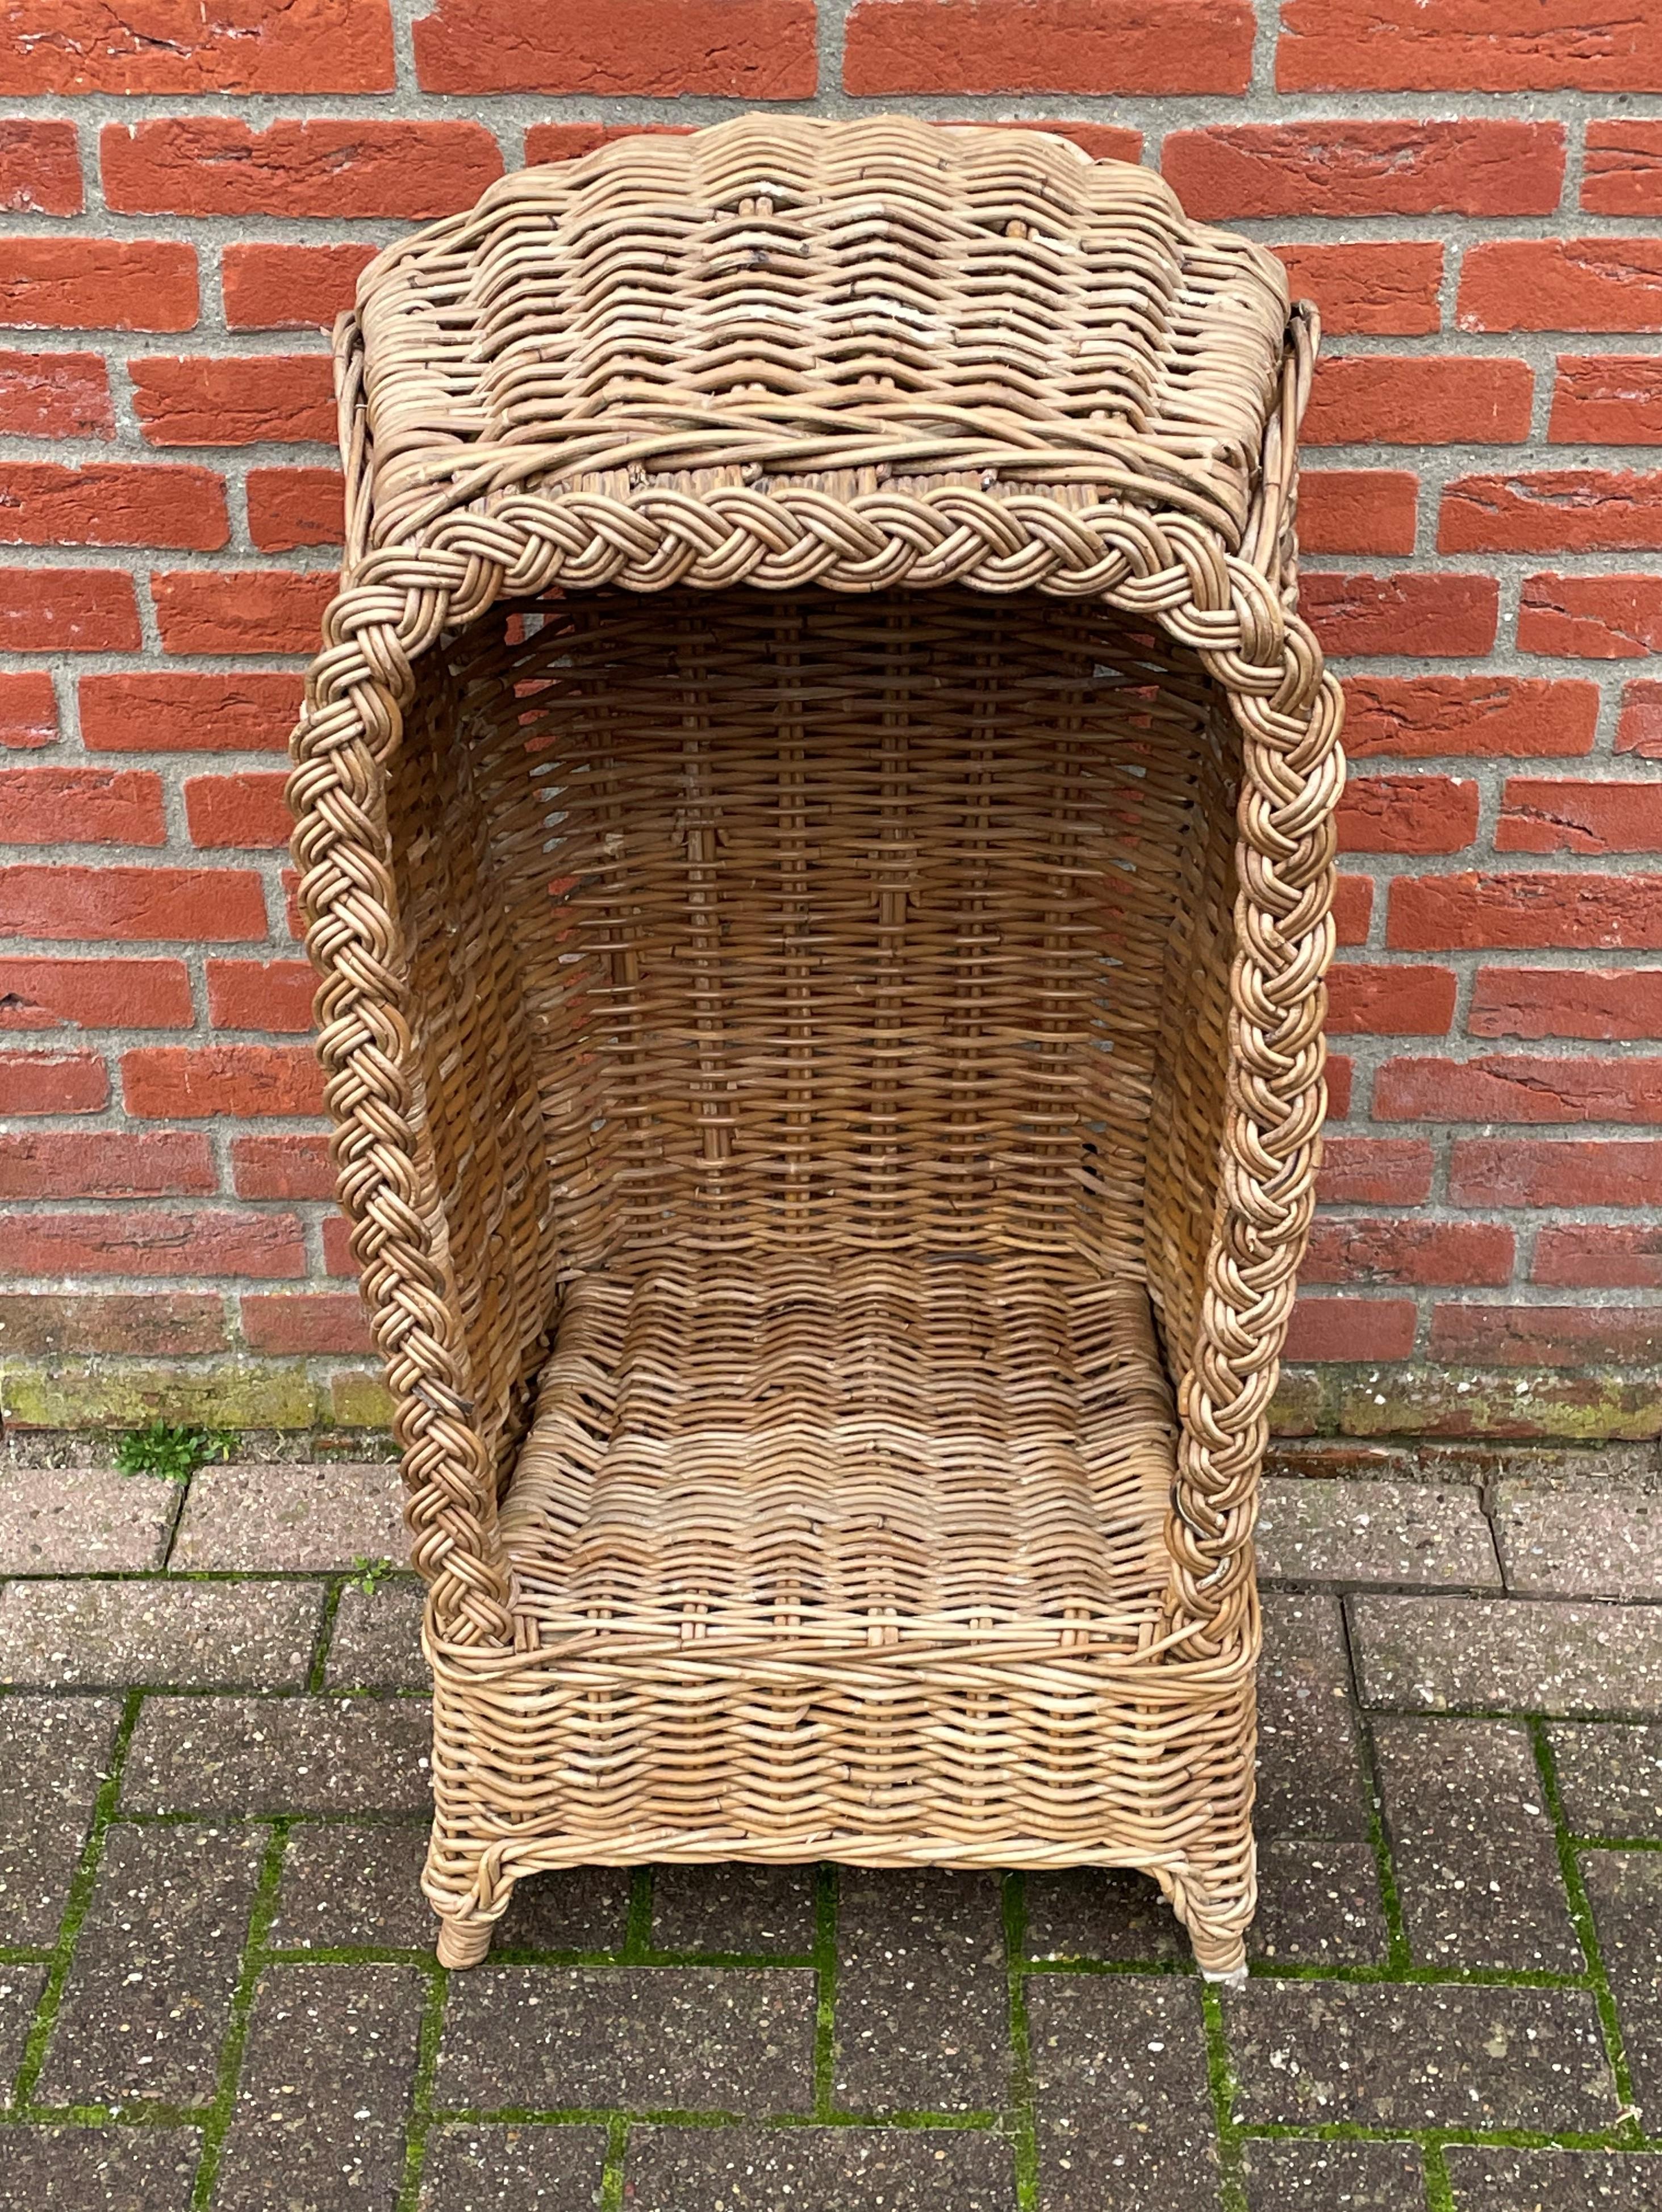 20th Century Very Rare & Super Decorative Antique-Like Hand Woven Rattan Beach Chair for Kids For Sale